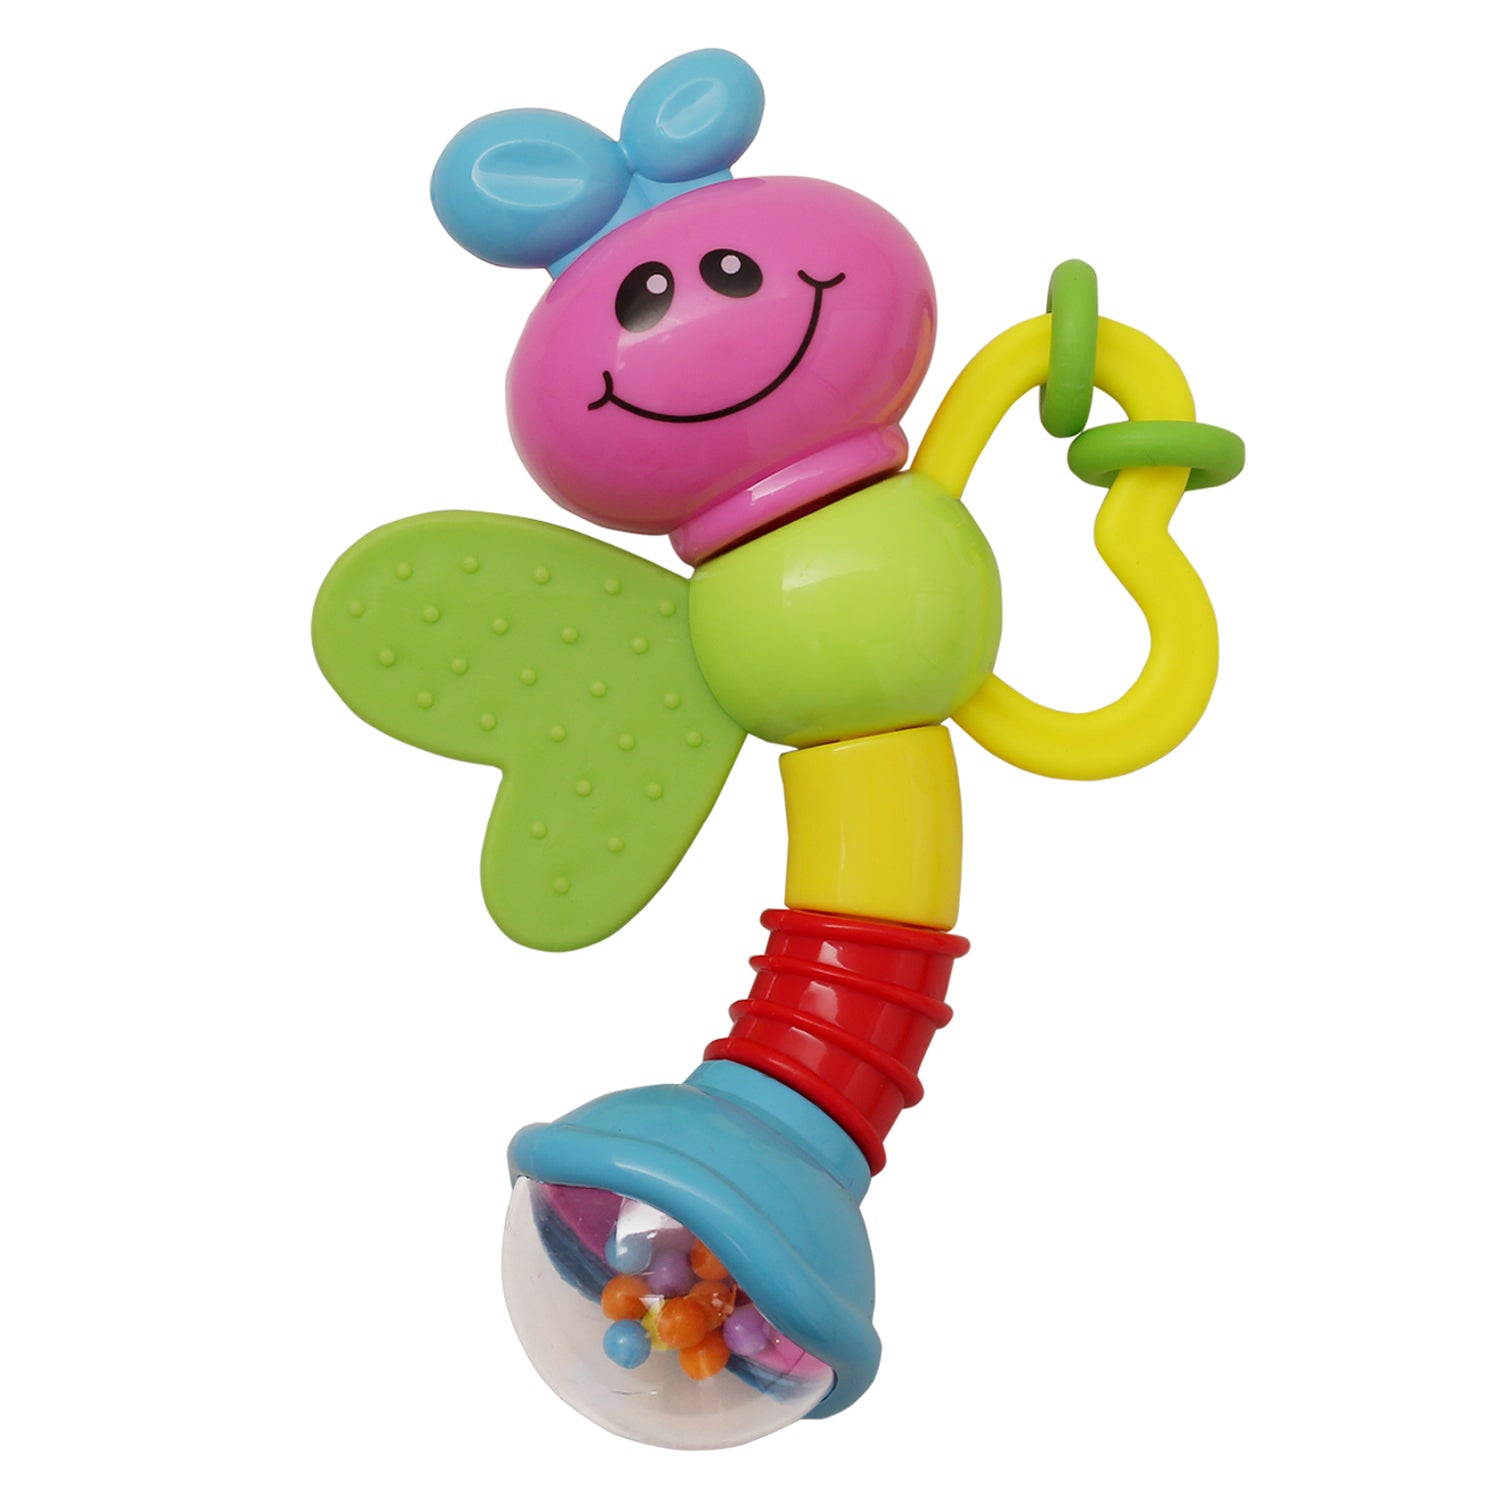 Premium Multicolour Set of 5 Musical Rattle Toys With Light - Baby Moo